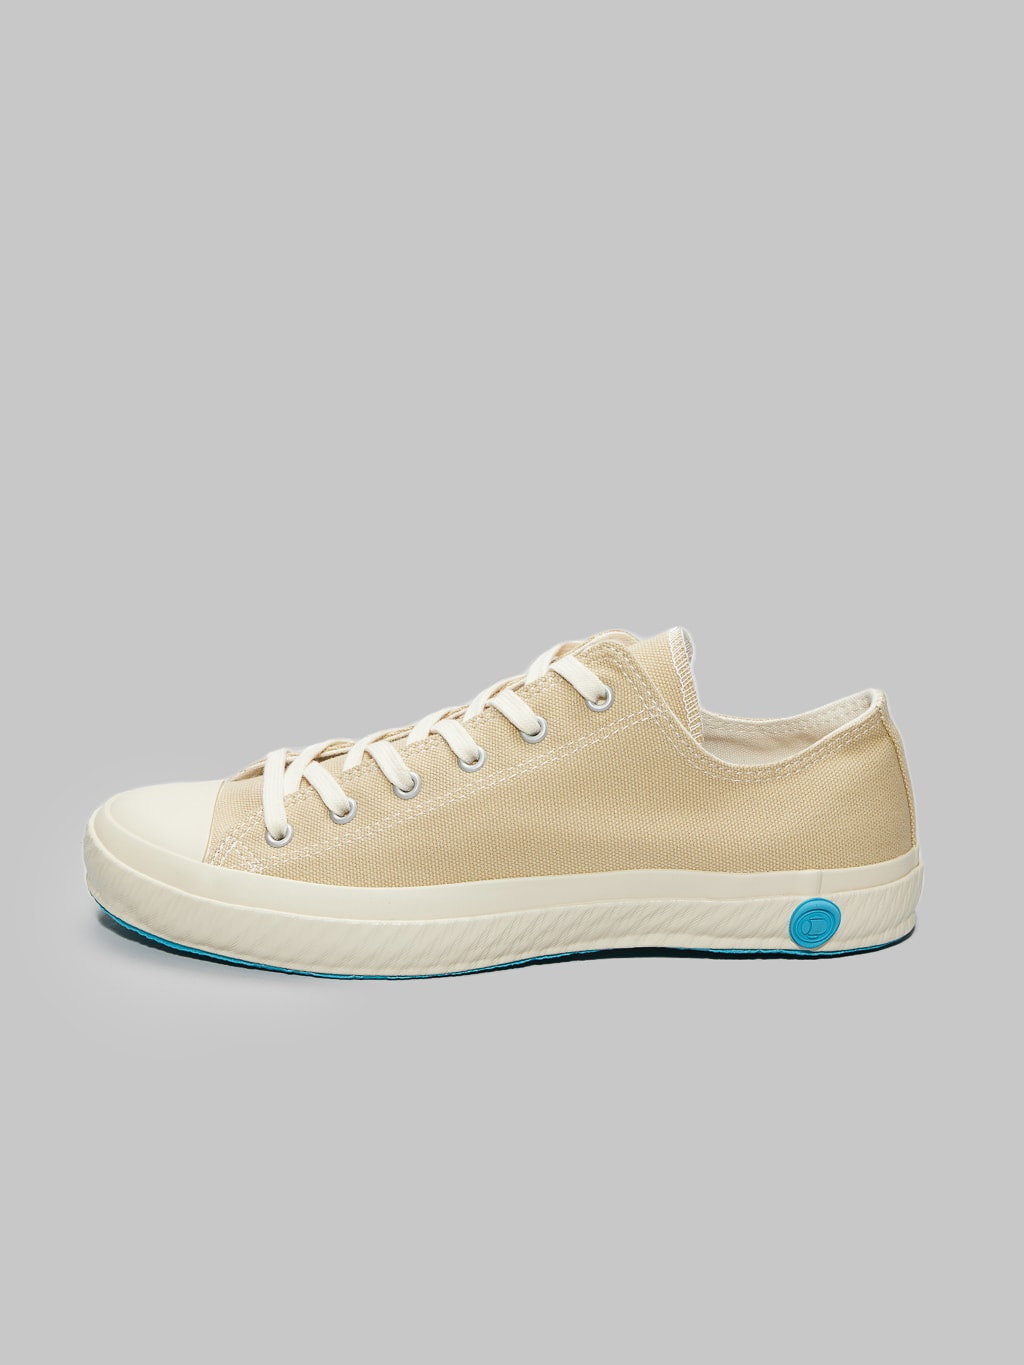 Shoes like pottery low beige sneakers craftsmanship